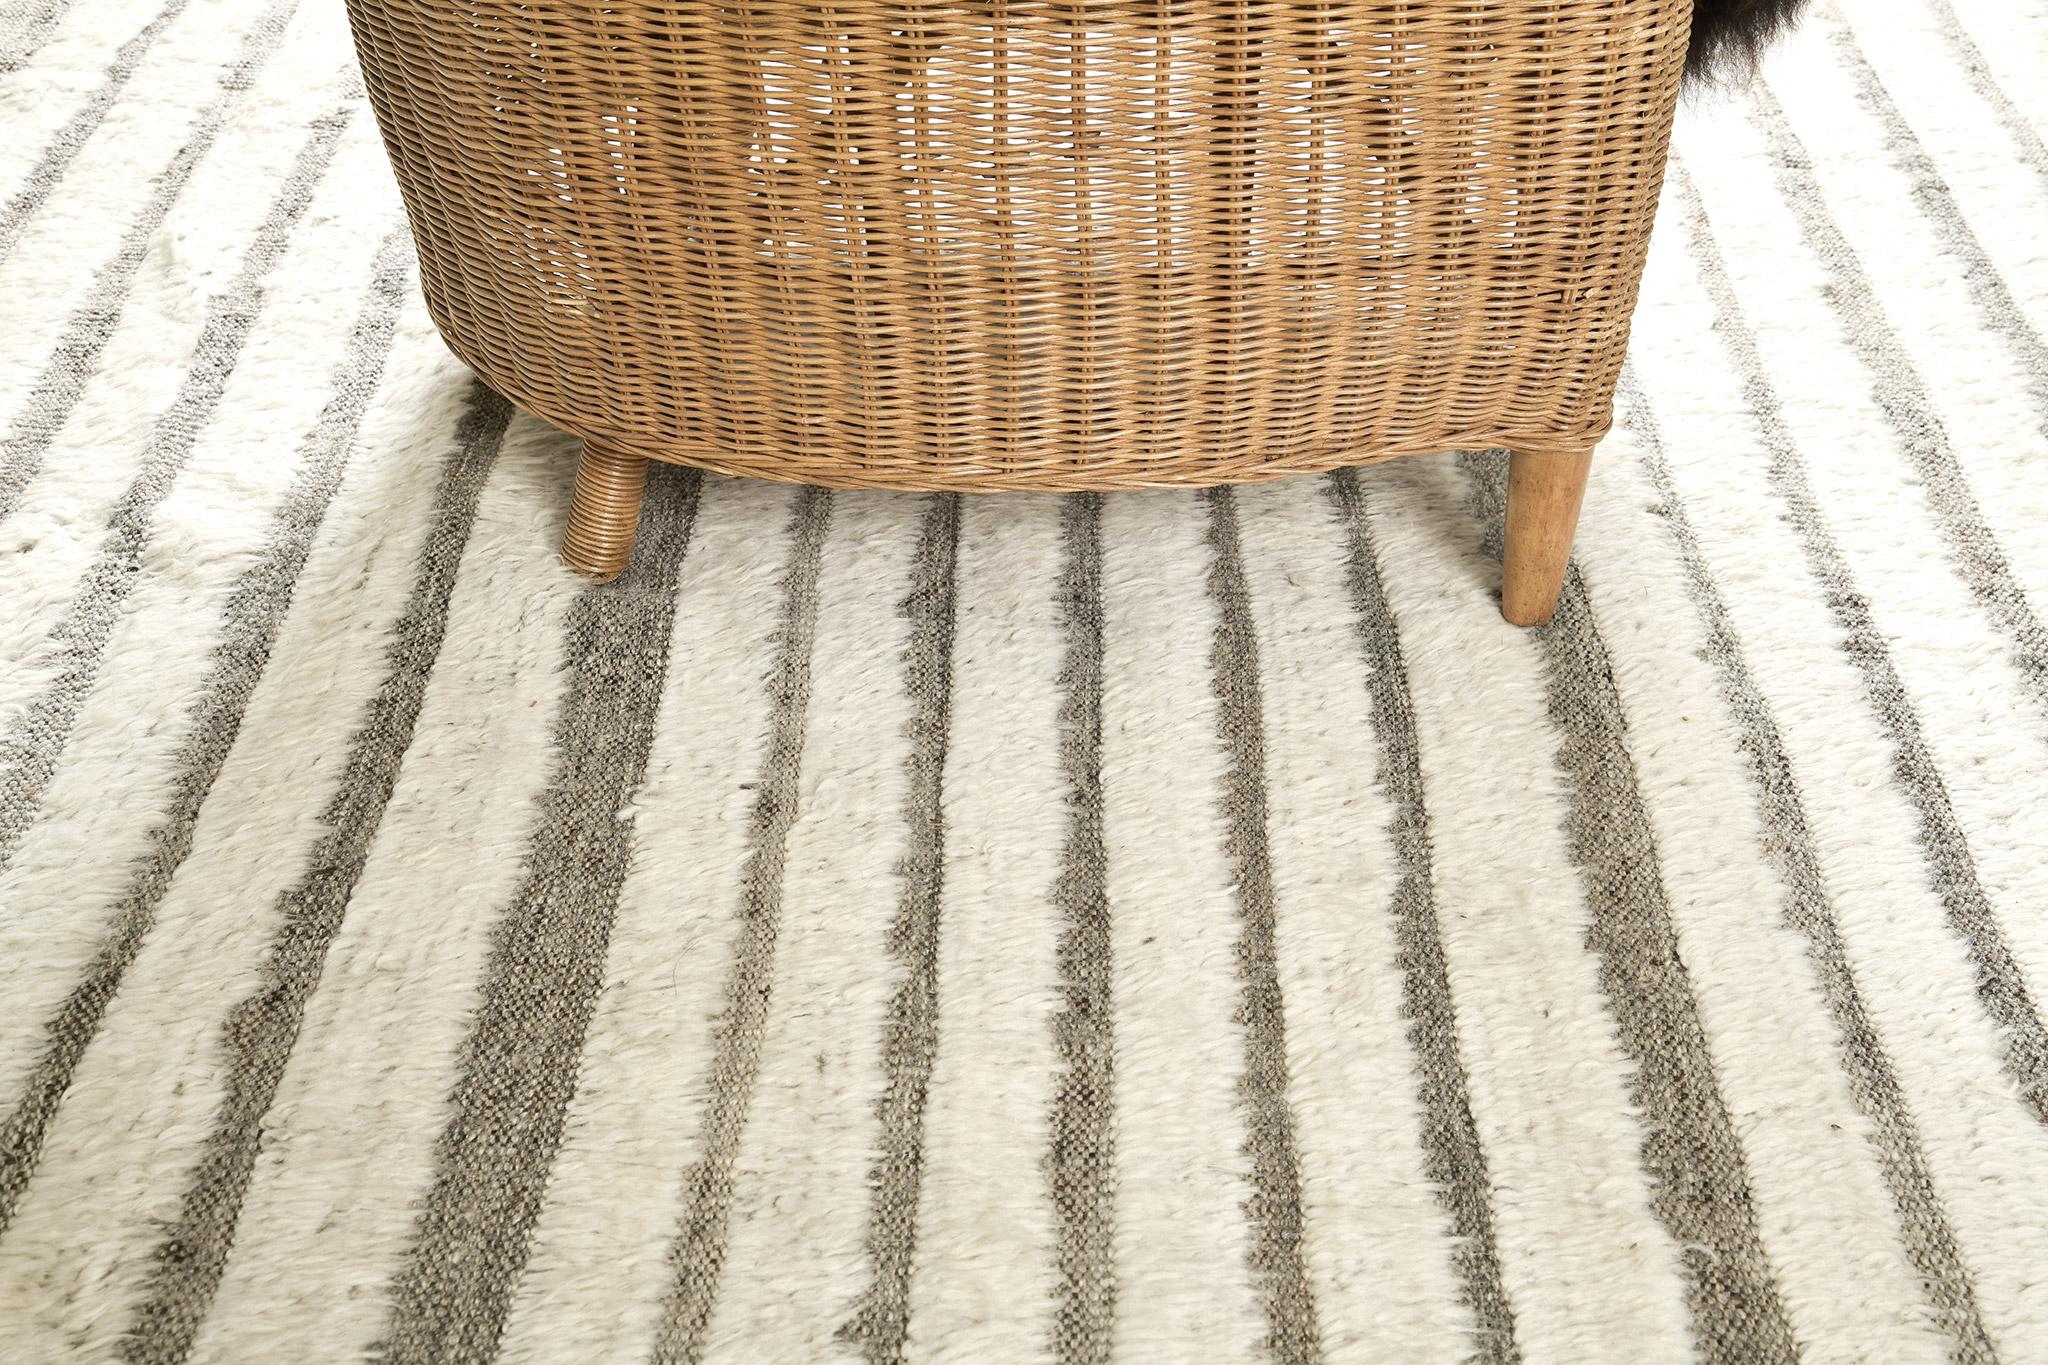 Shipca is a handwoven luxurious wool rug with timeless embossed detailing. In addition to its neutral-toned flatweave, Shipca has a beautiful gray shag that brings a lustrous and exciting feel to one's space. The Haute Bohemian collection is